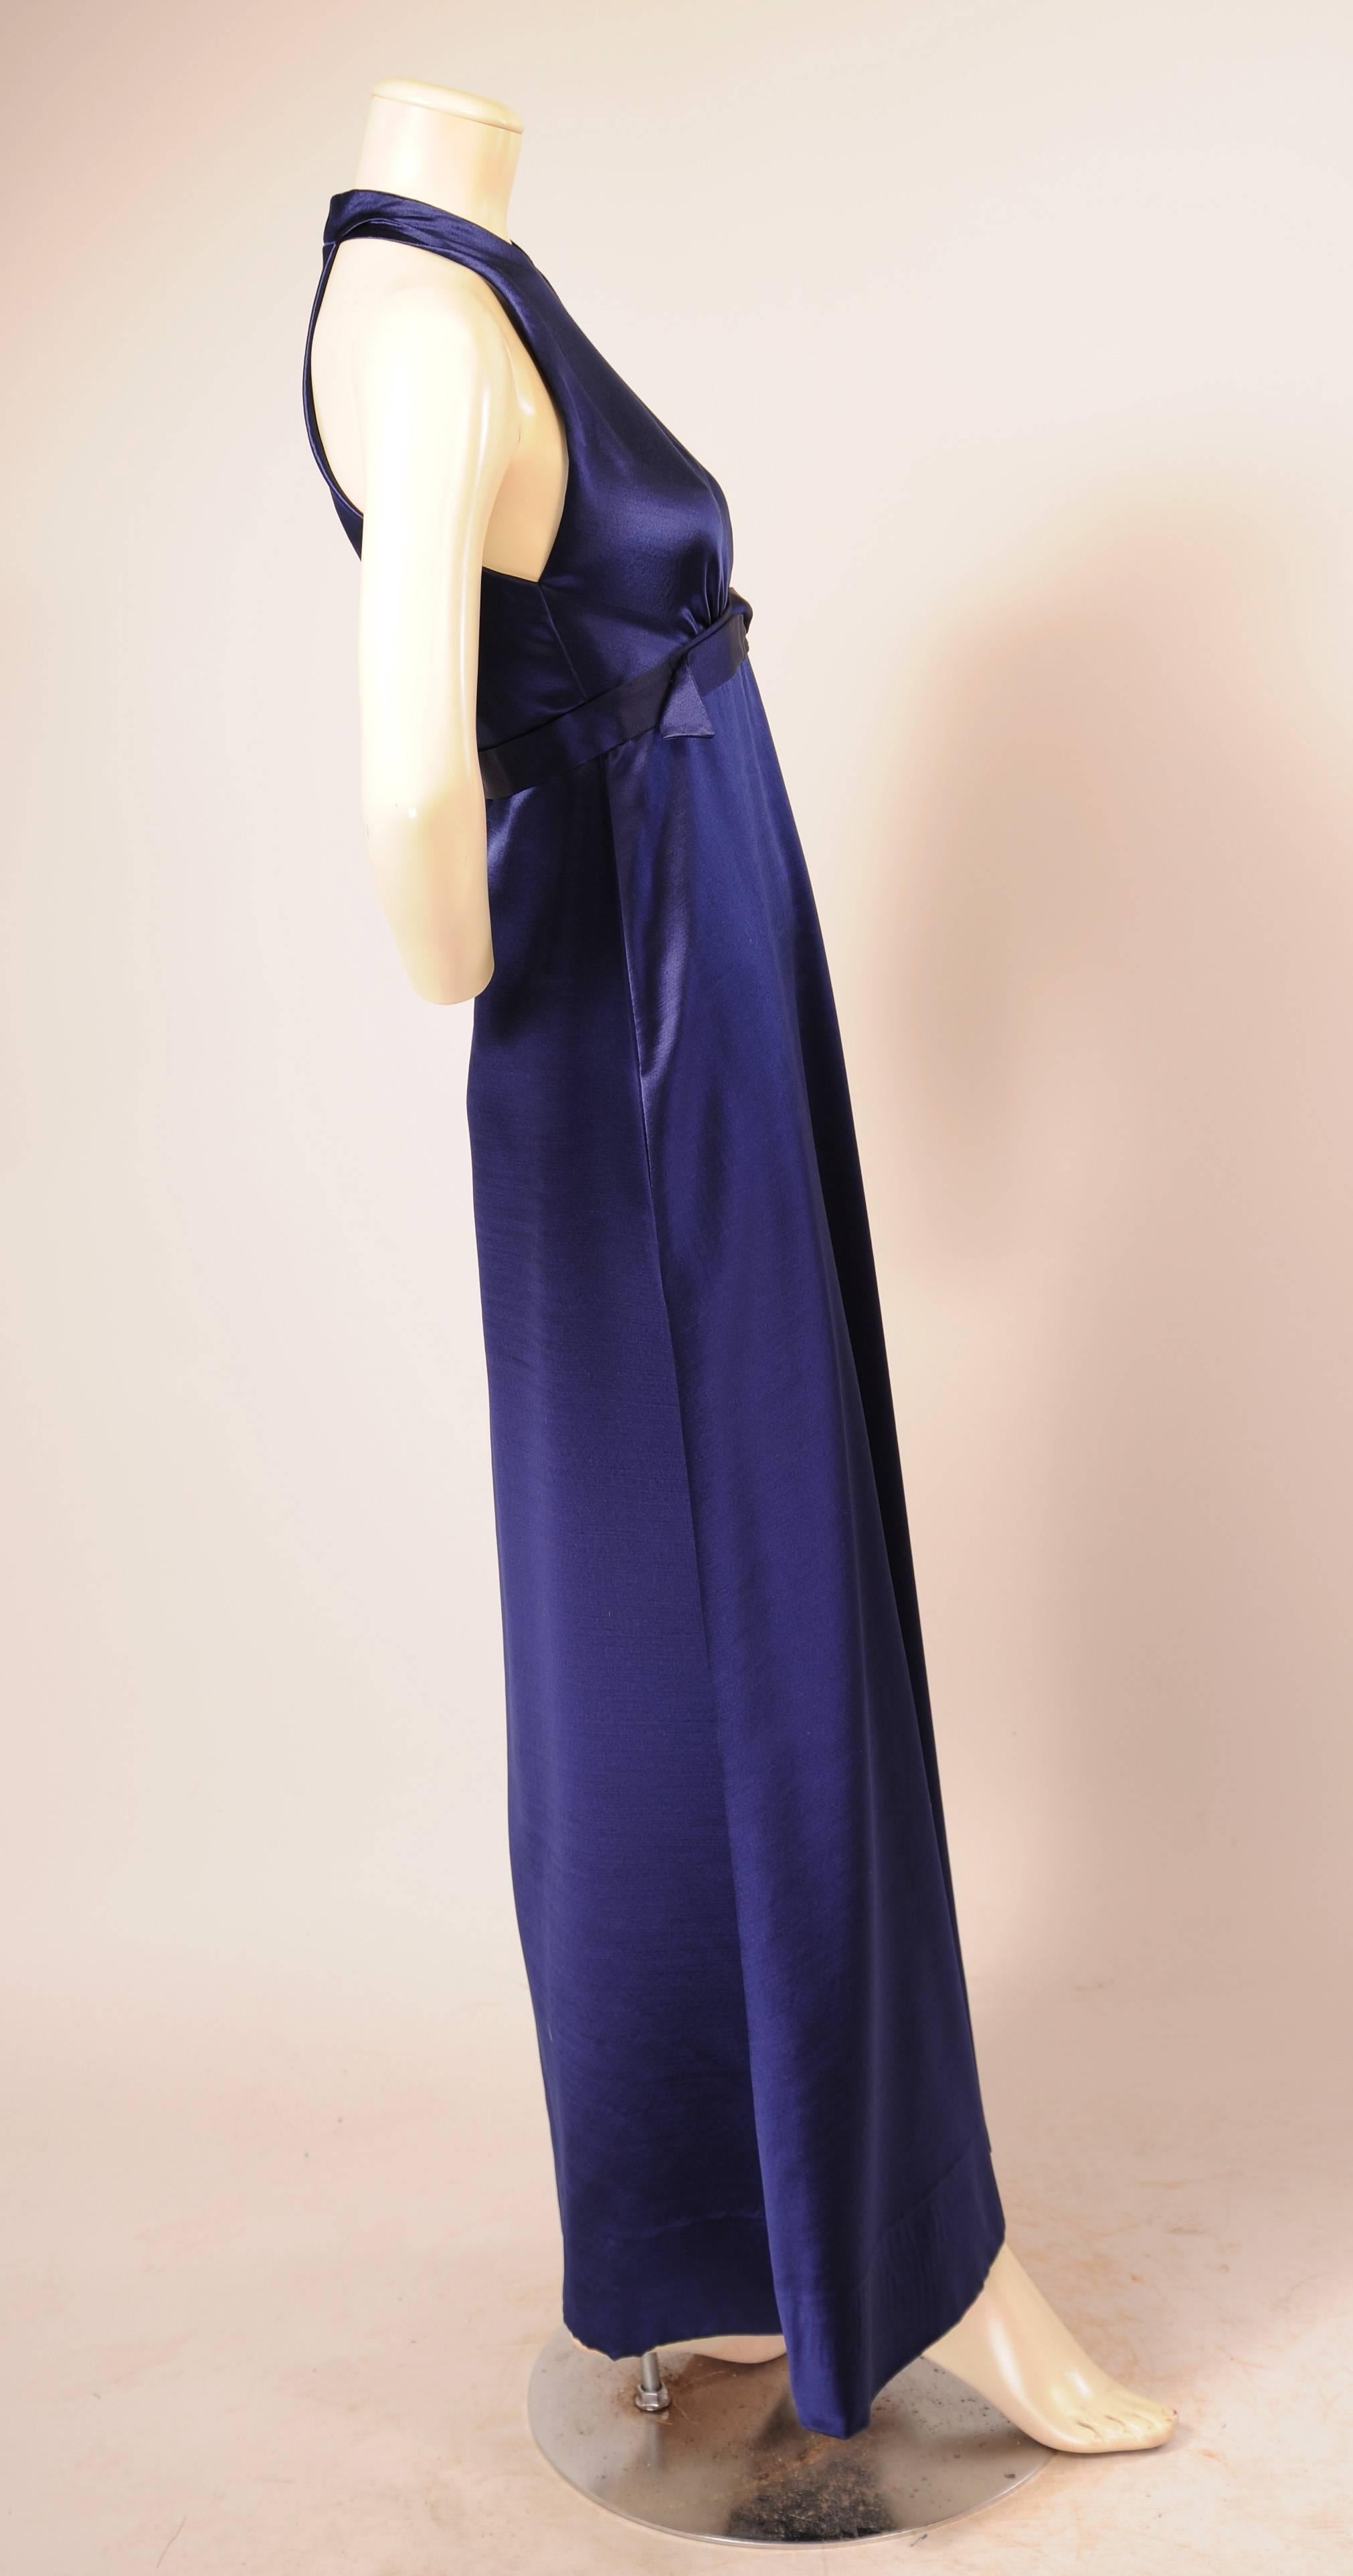 Sapphire blue silk satin is perfect for this sleek evening dress designed by James Galanos in the 1970's. The round neckline and cut in armholes create a clean modern look, accented by the slightly raised waistline with silver ring trim. The dress